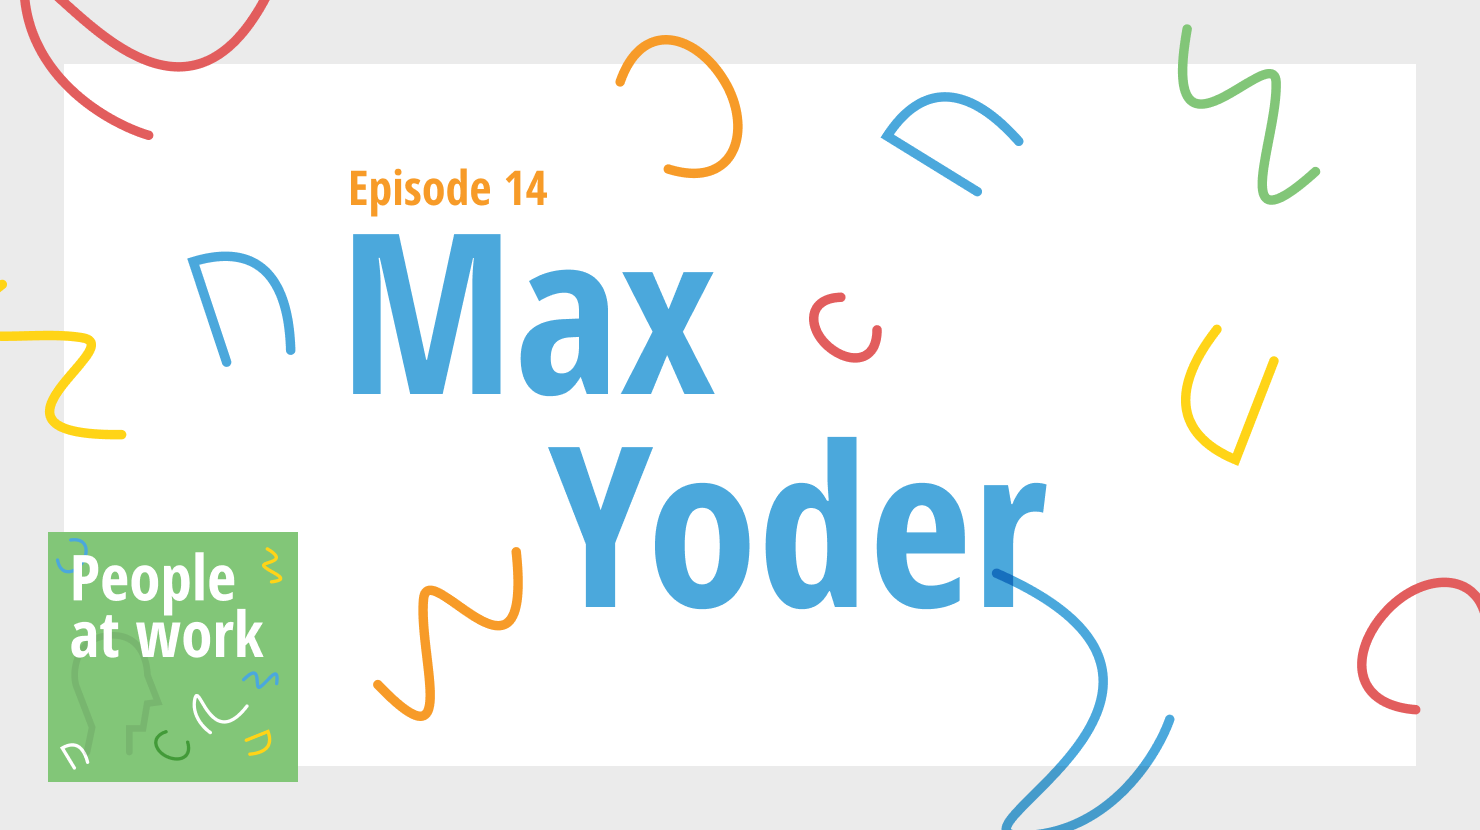 Max Yoder on agreements vs. expectations